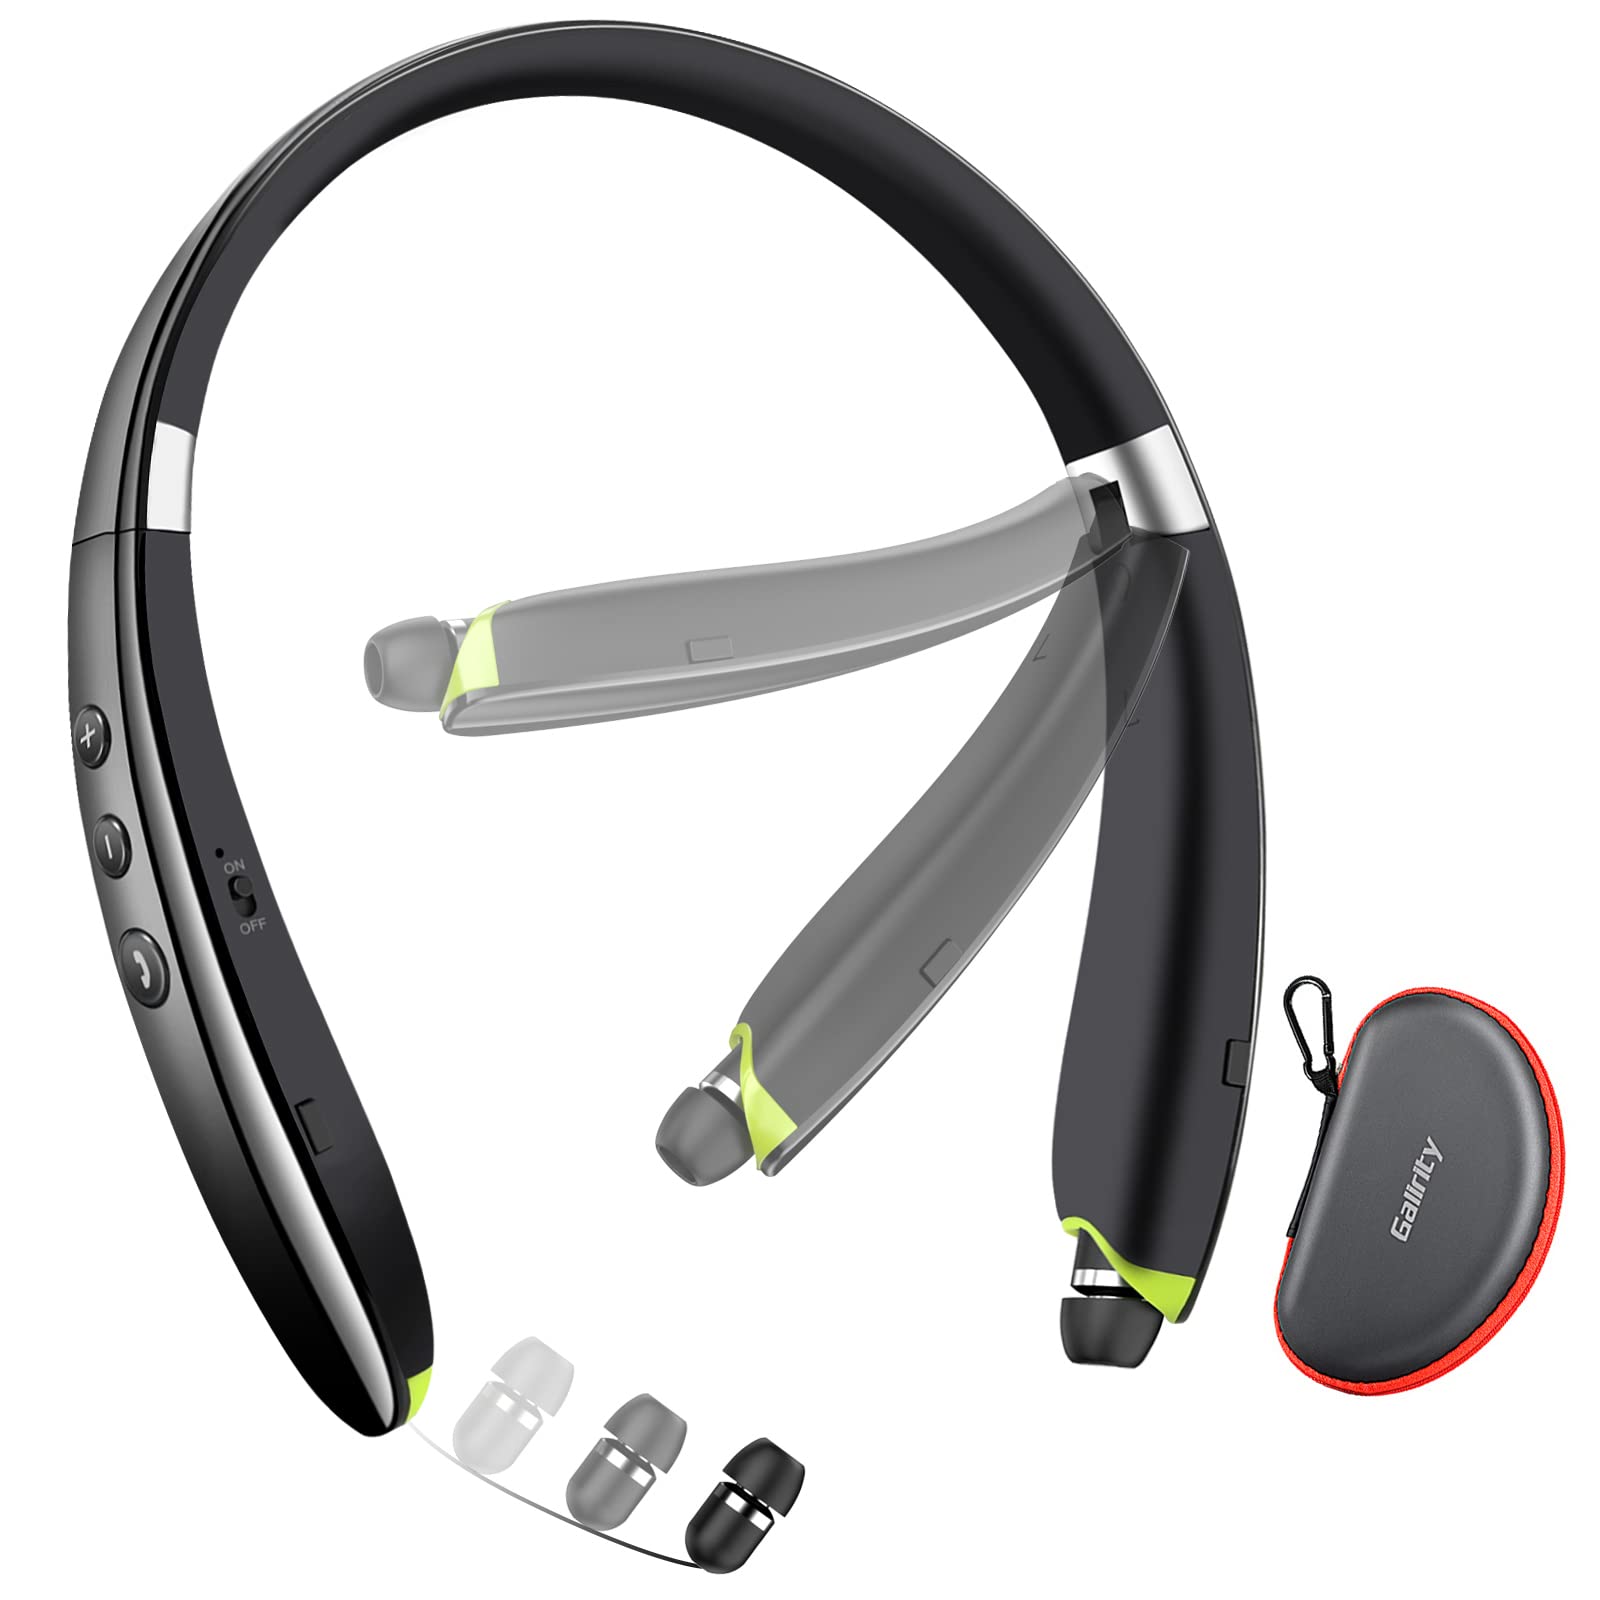  Galirity Bluetooth Headset, 2022 Upgraded Neckband Bluetooth Headphones with Retractable Earbuds, Noise Cancelling Stereo Earphones with Mic, Foldable Wireless Headphones for Sports Office with Carry...